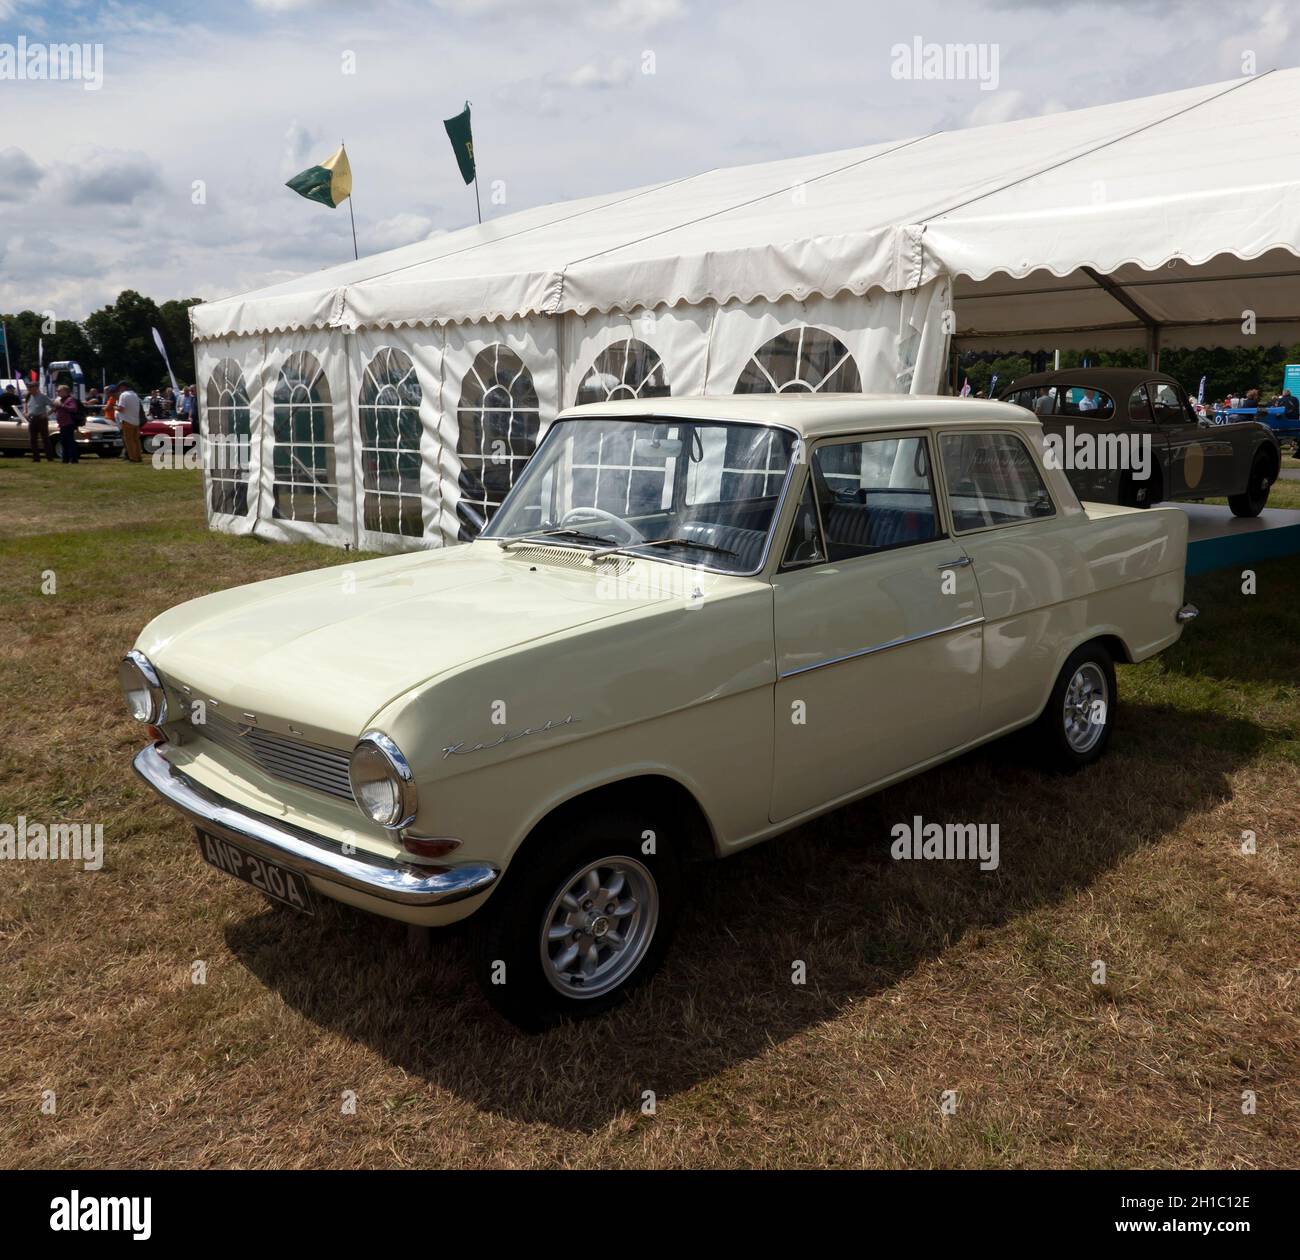 infrastructuur Voorkomen Bedoel Richard Hammond's 1963 Opel Kadett "Oliver", which he drove in the Top Gear  Botswana Special, on display at the 2021 London Classic Car Show Stock  Photo - Alamy